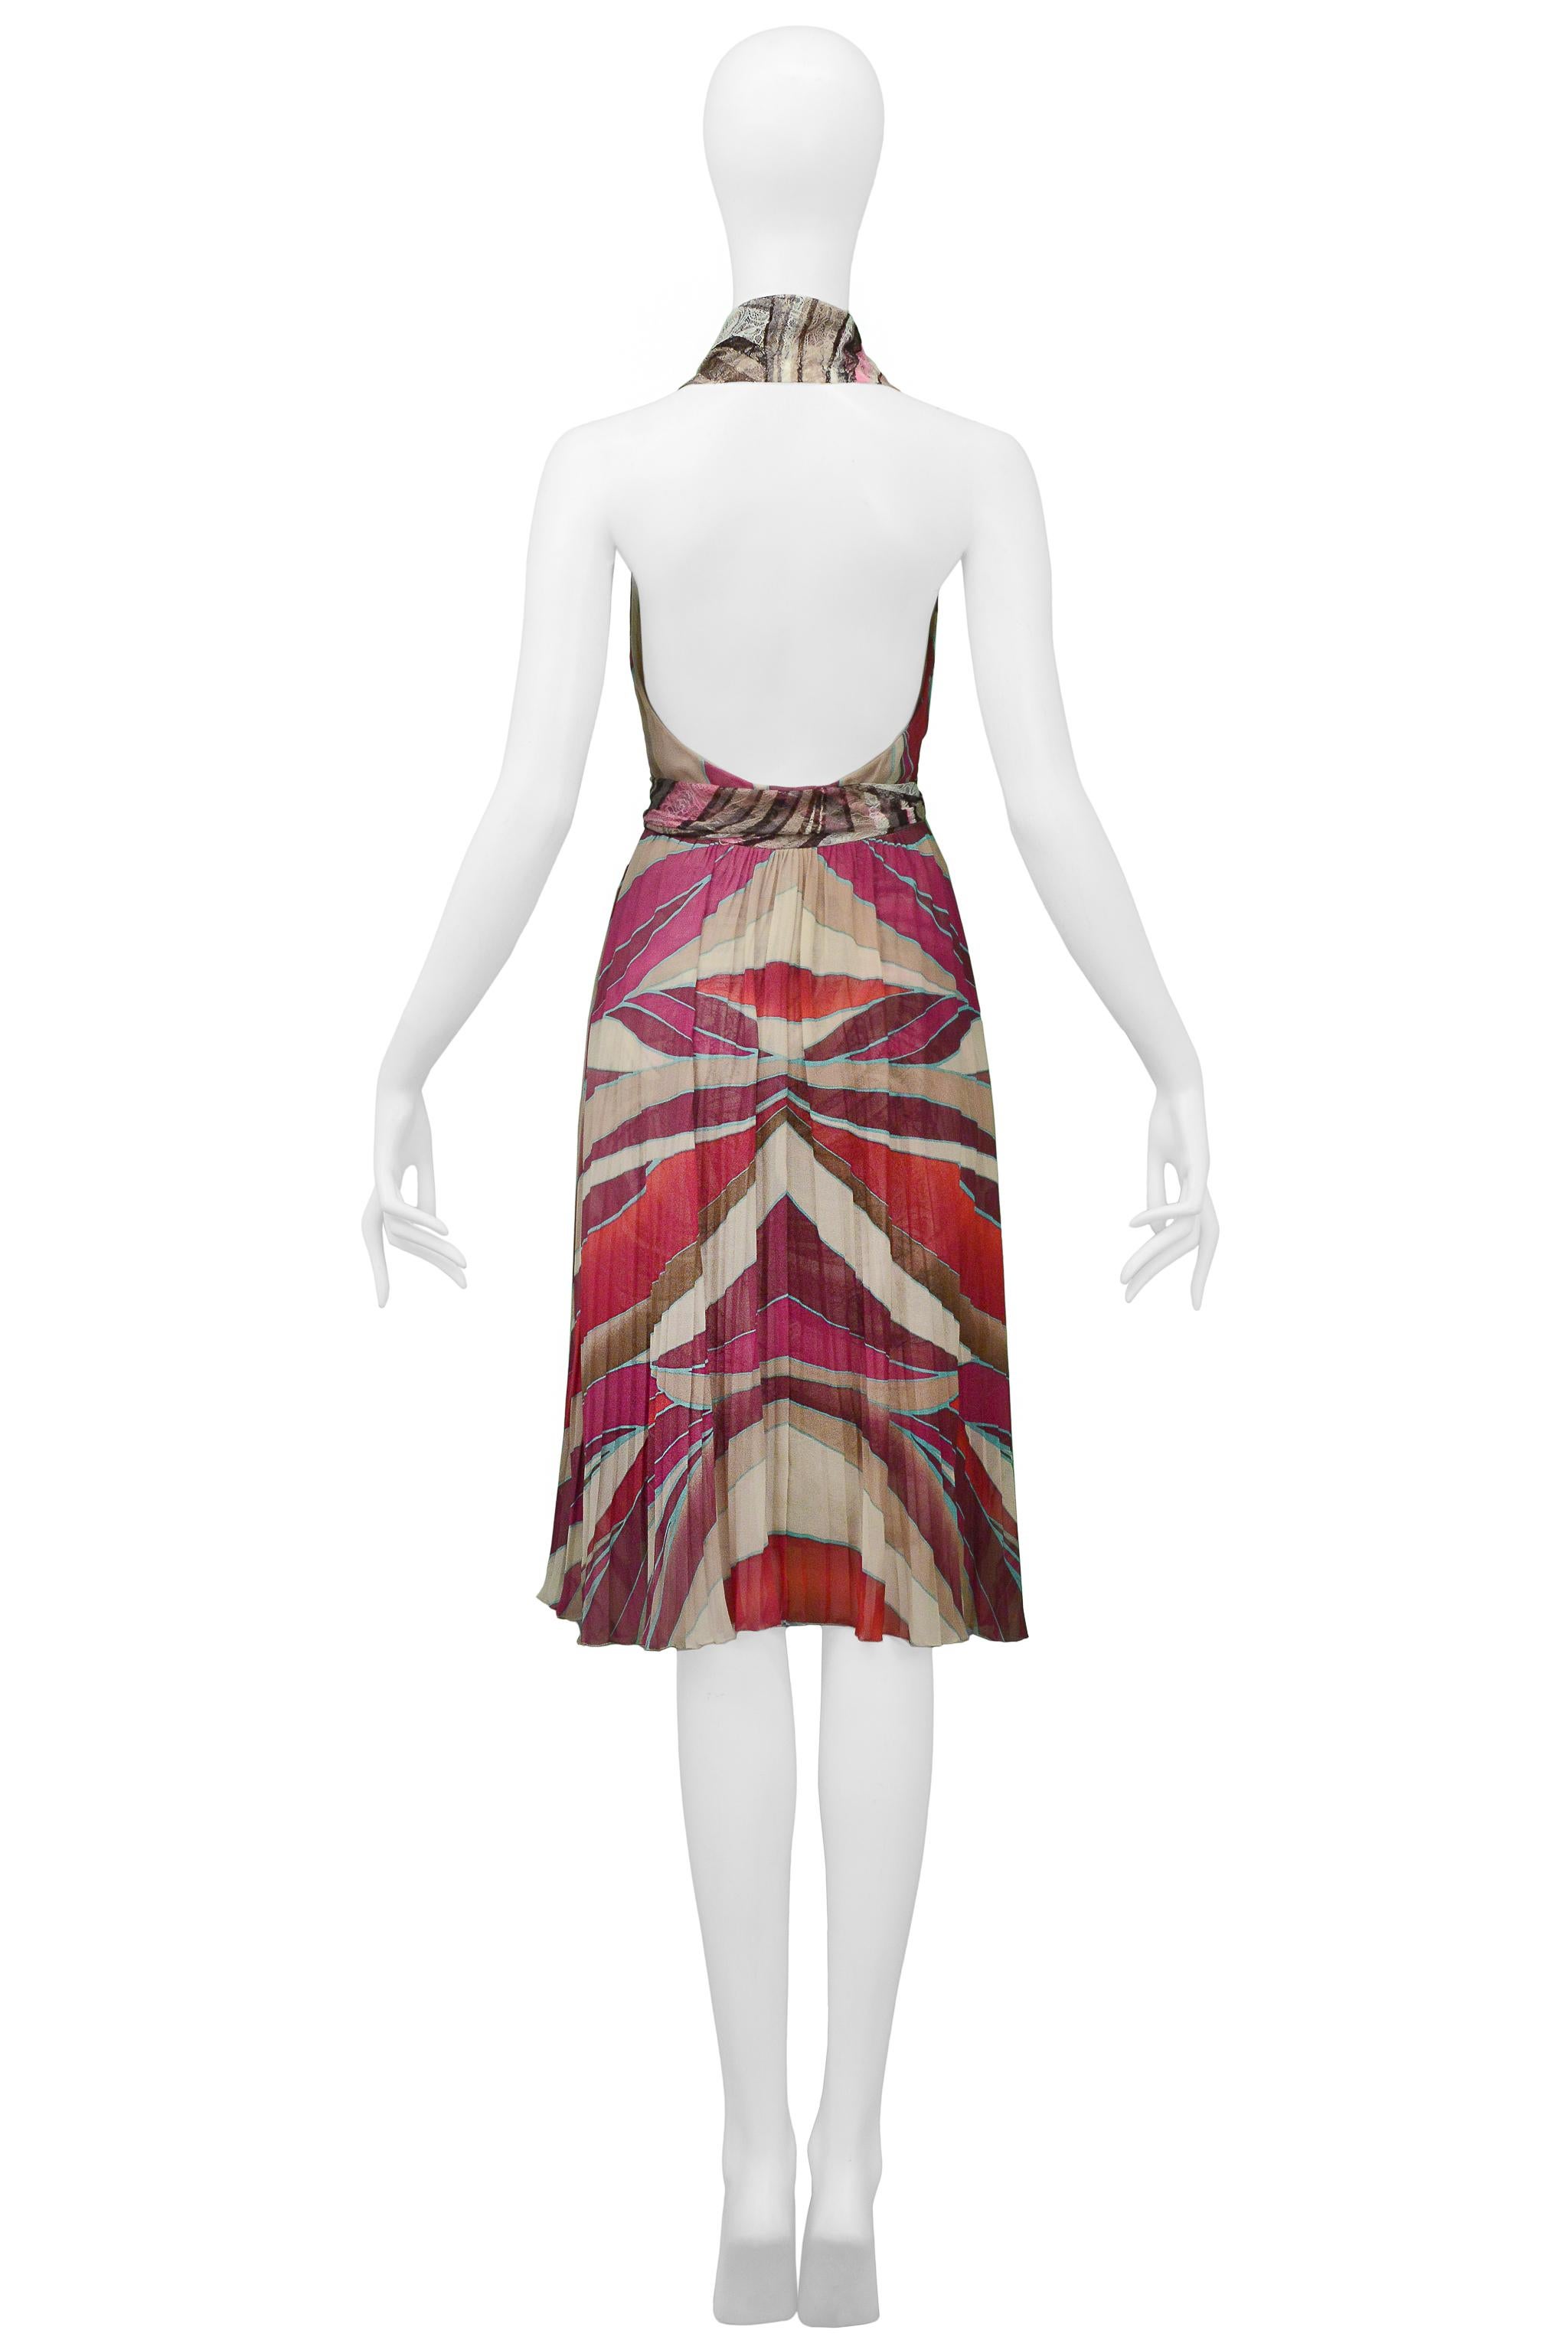 Versace Pink Abstract Print Halter Dress With Lace Panels 2000 In Excellent Condition For Sale In Los Angeles, CA